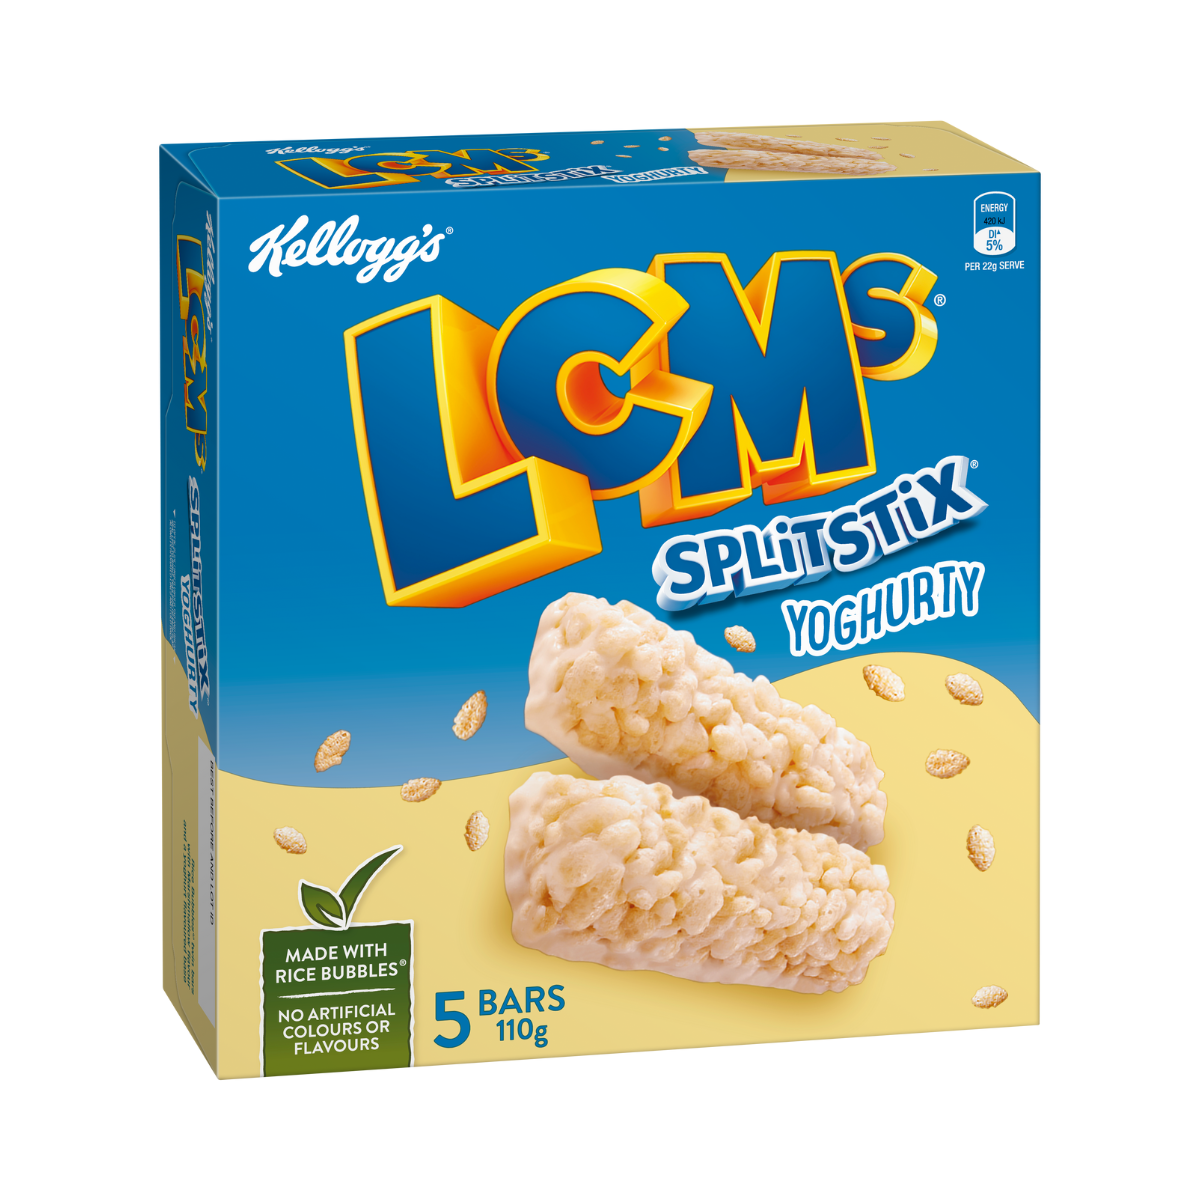 LCMS Yoghurty (front)